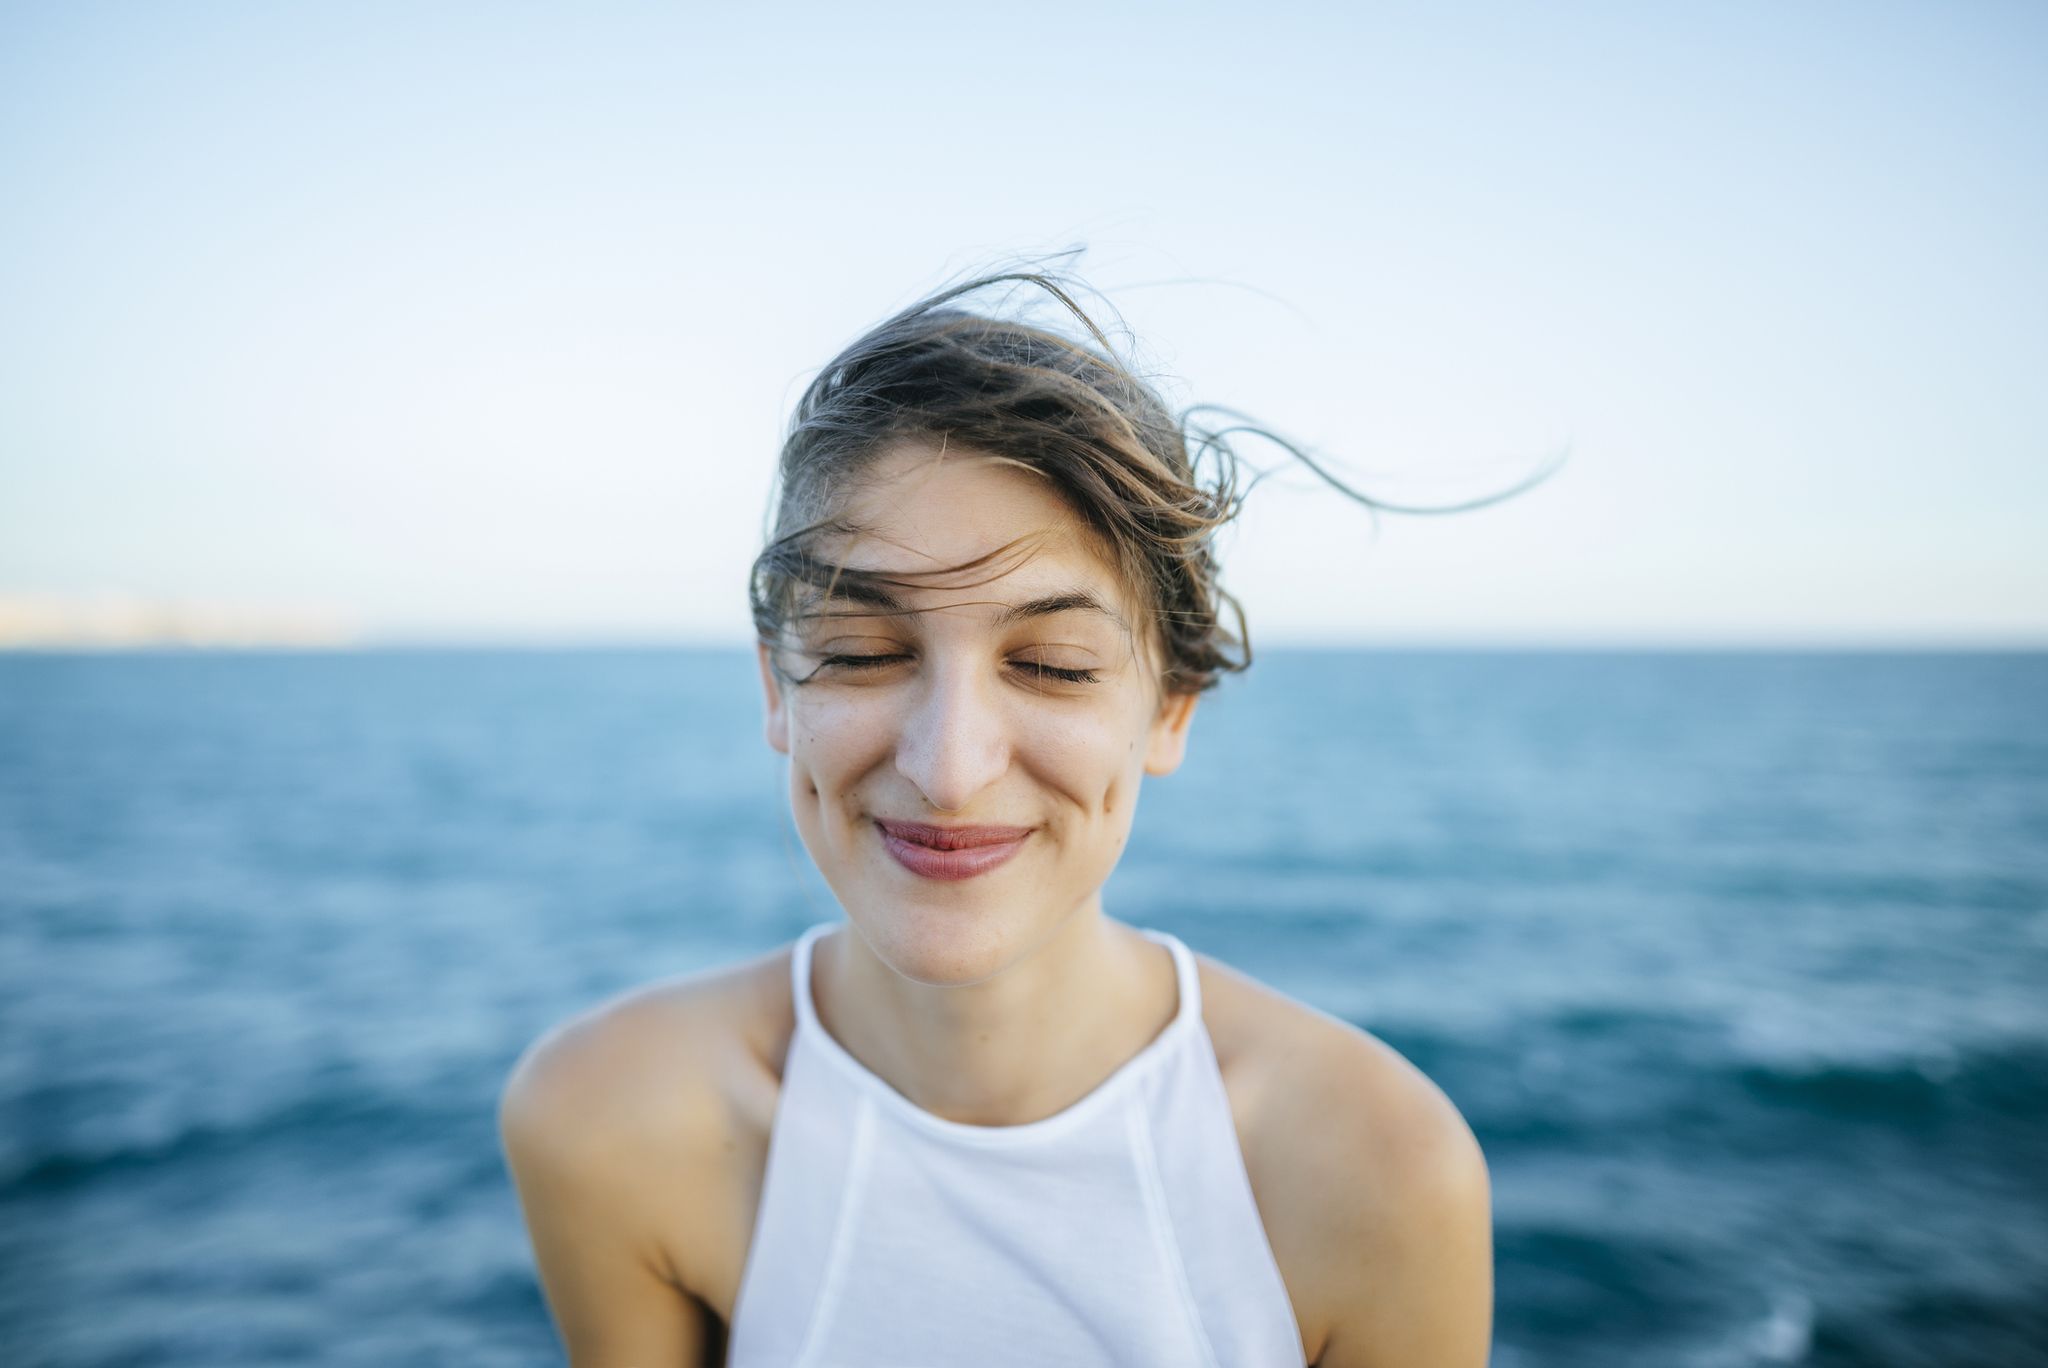 Young woman smiling with eyes closed with sea background